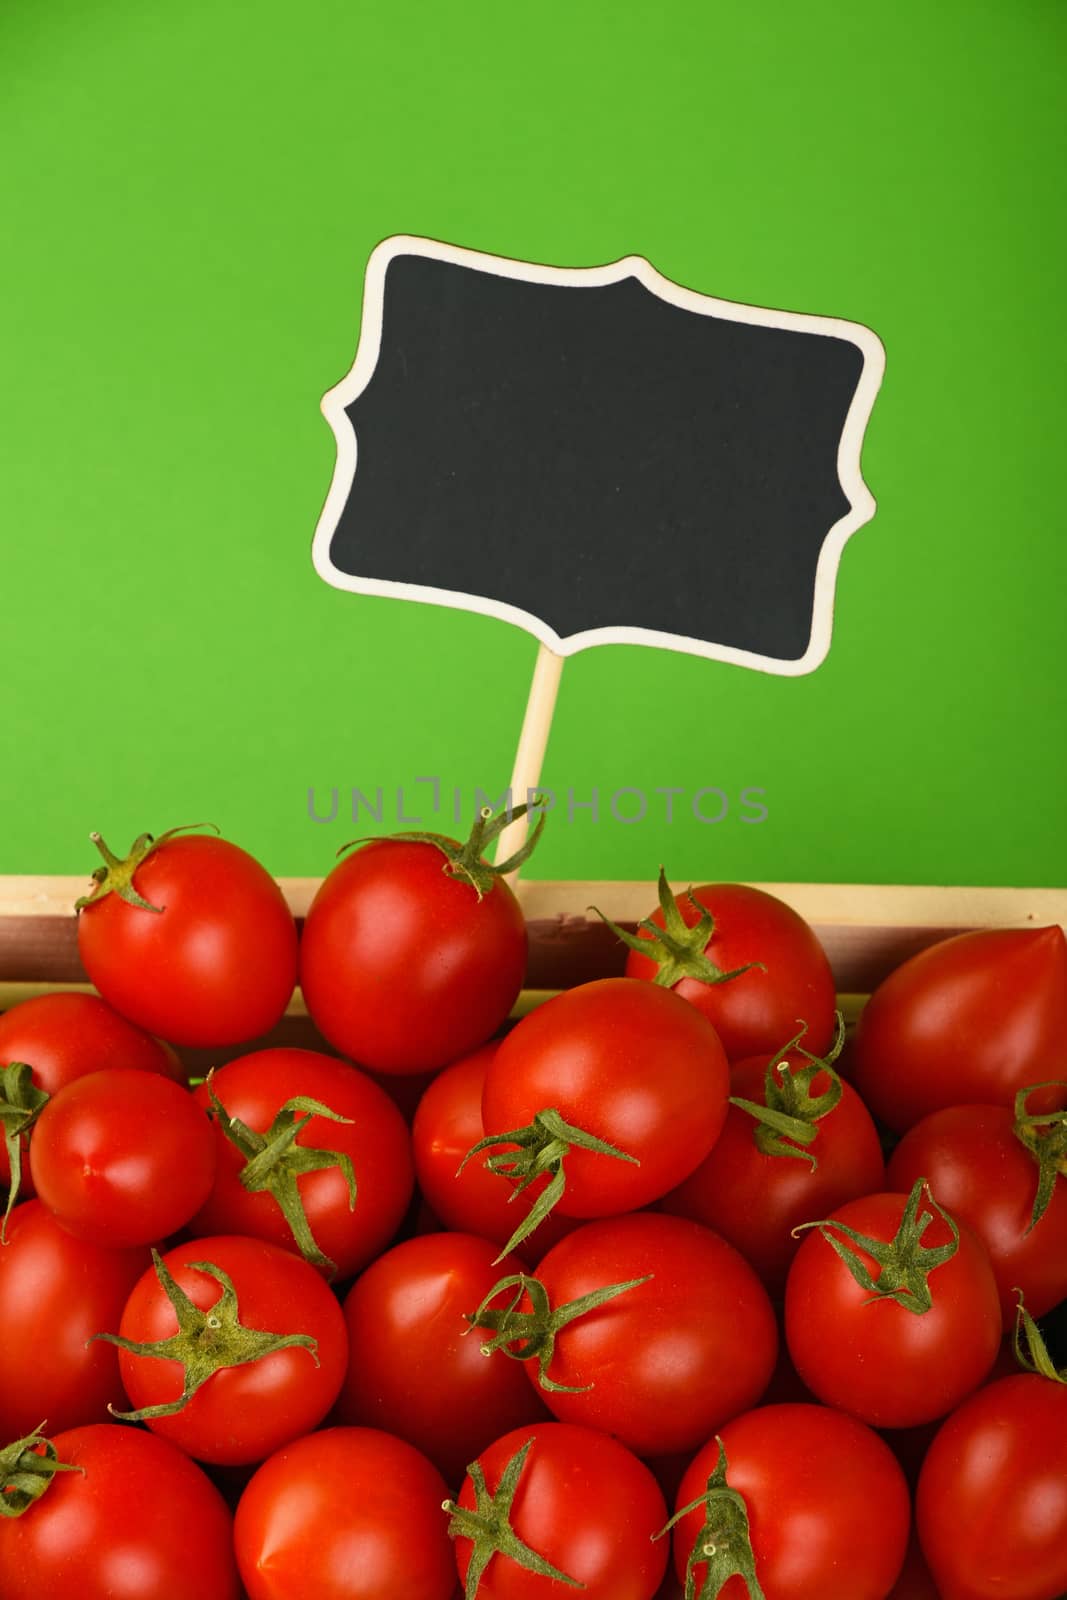 Fresh red ripe cherry tomatoes in small wooden box with black chalkboard price sign tag over green background, high angle view